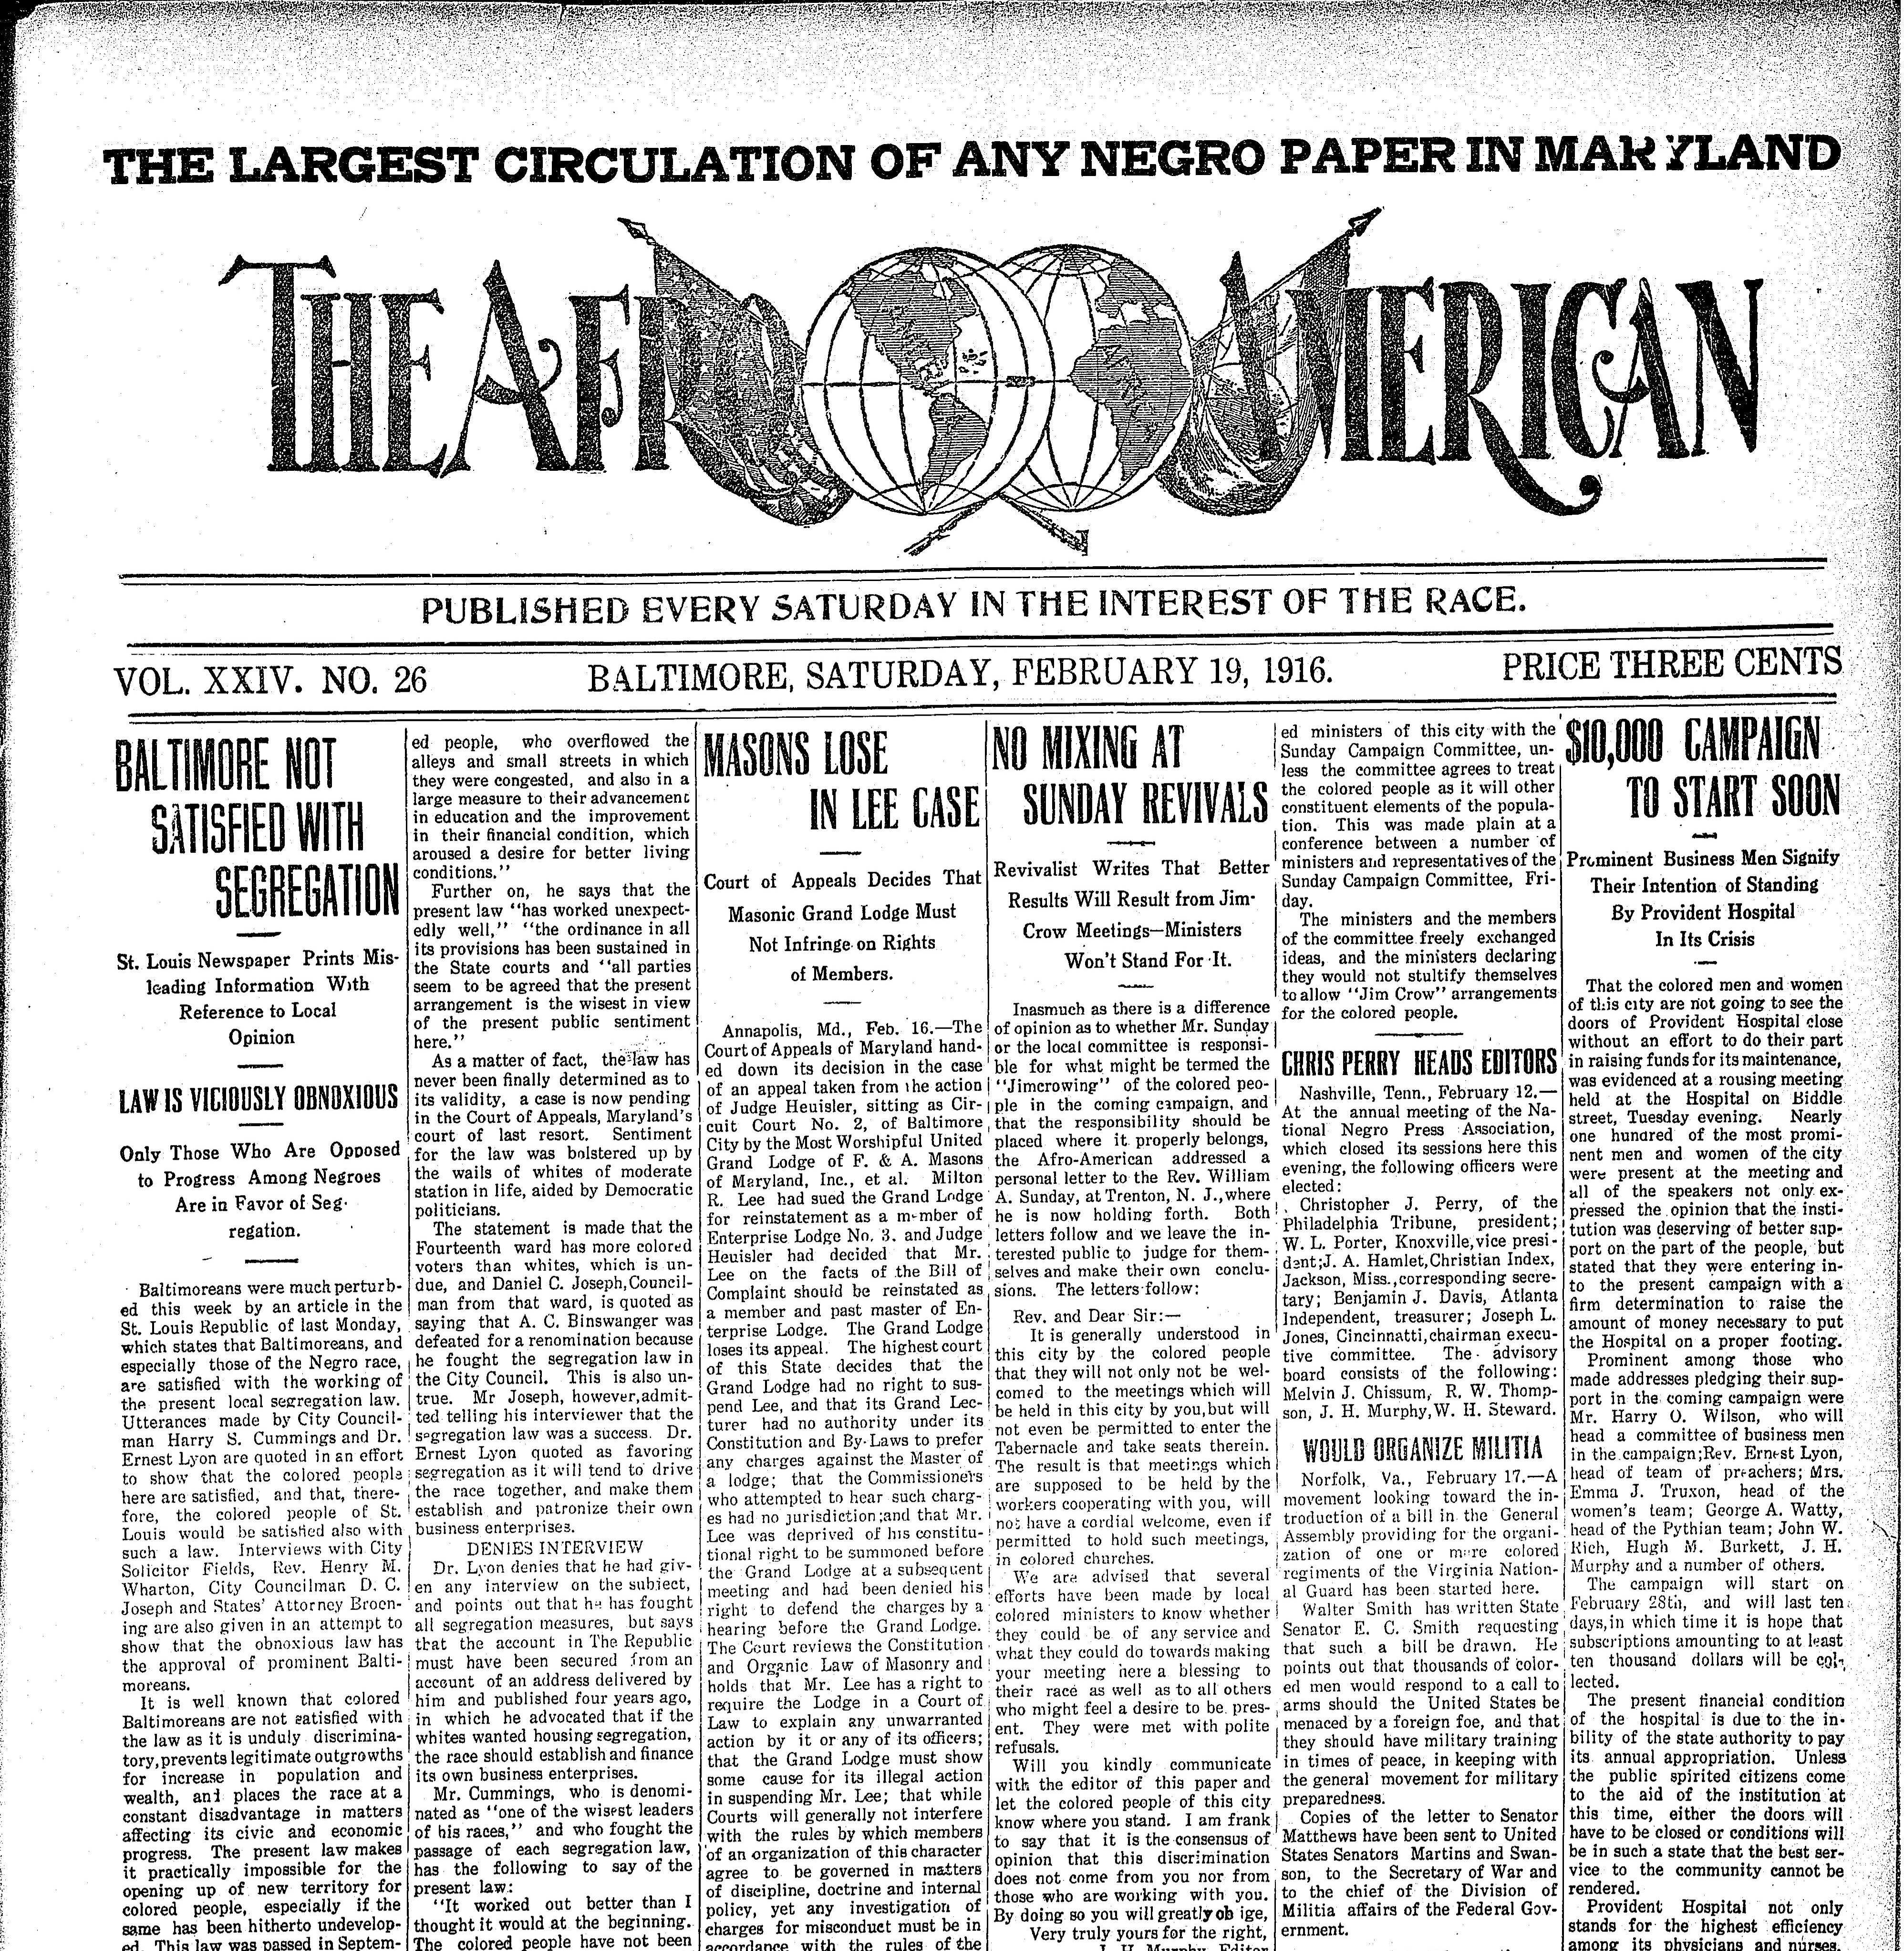 Front page of the Baltimore Afro-American, February 19, 1916